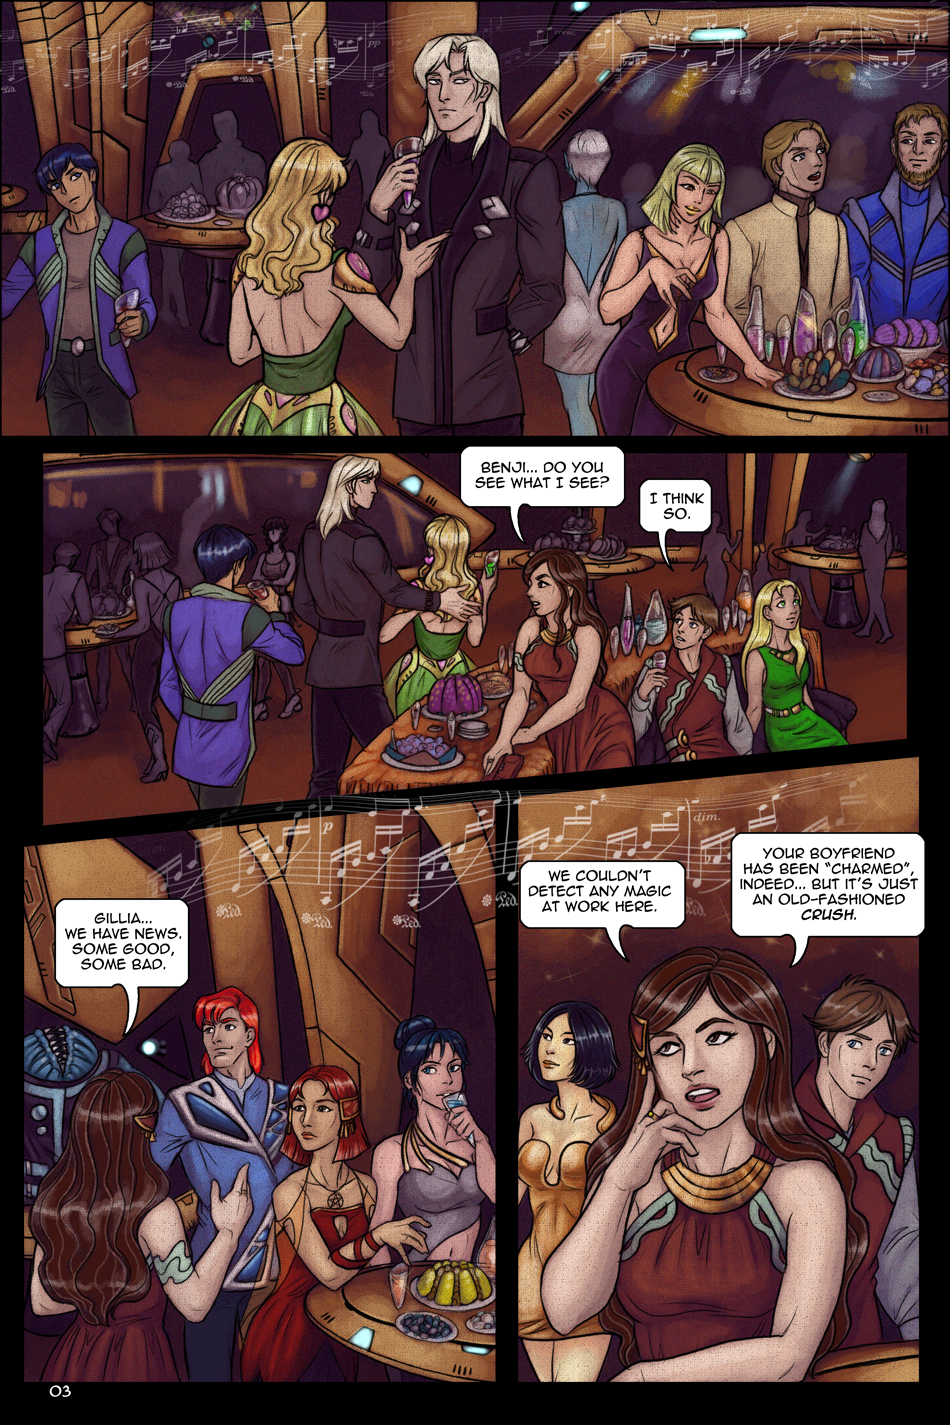 The Strangest Coven by Whiteshaix Page 3 of 4